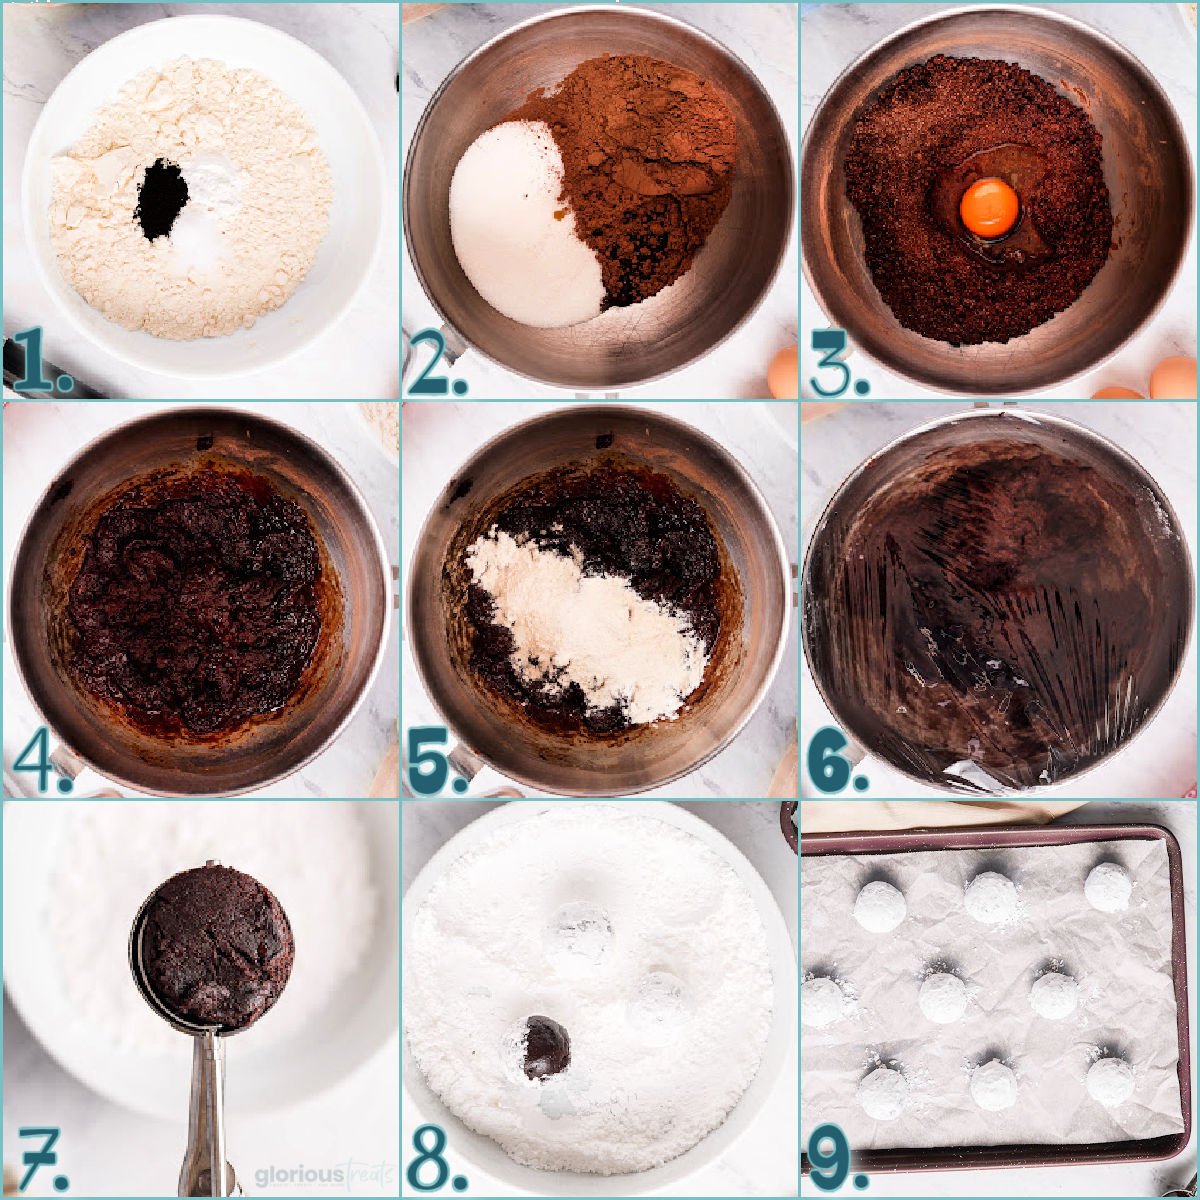 nine image collage showing how to make chocolate crinkle cookie recipe.